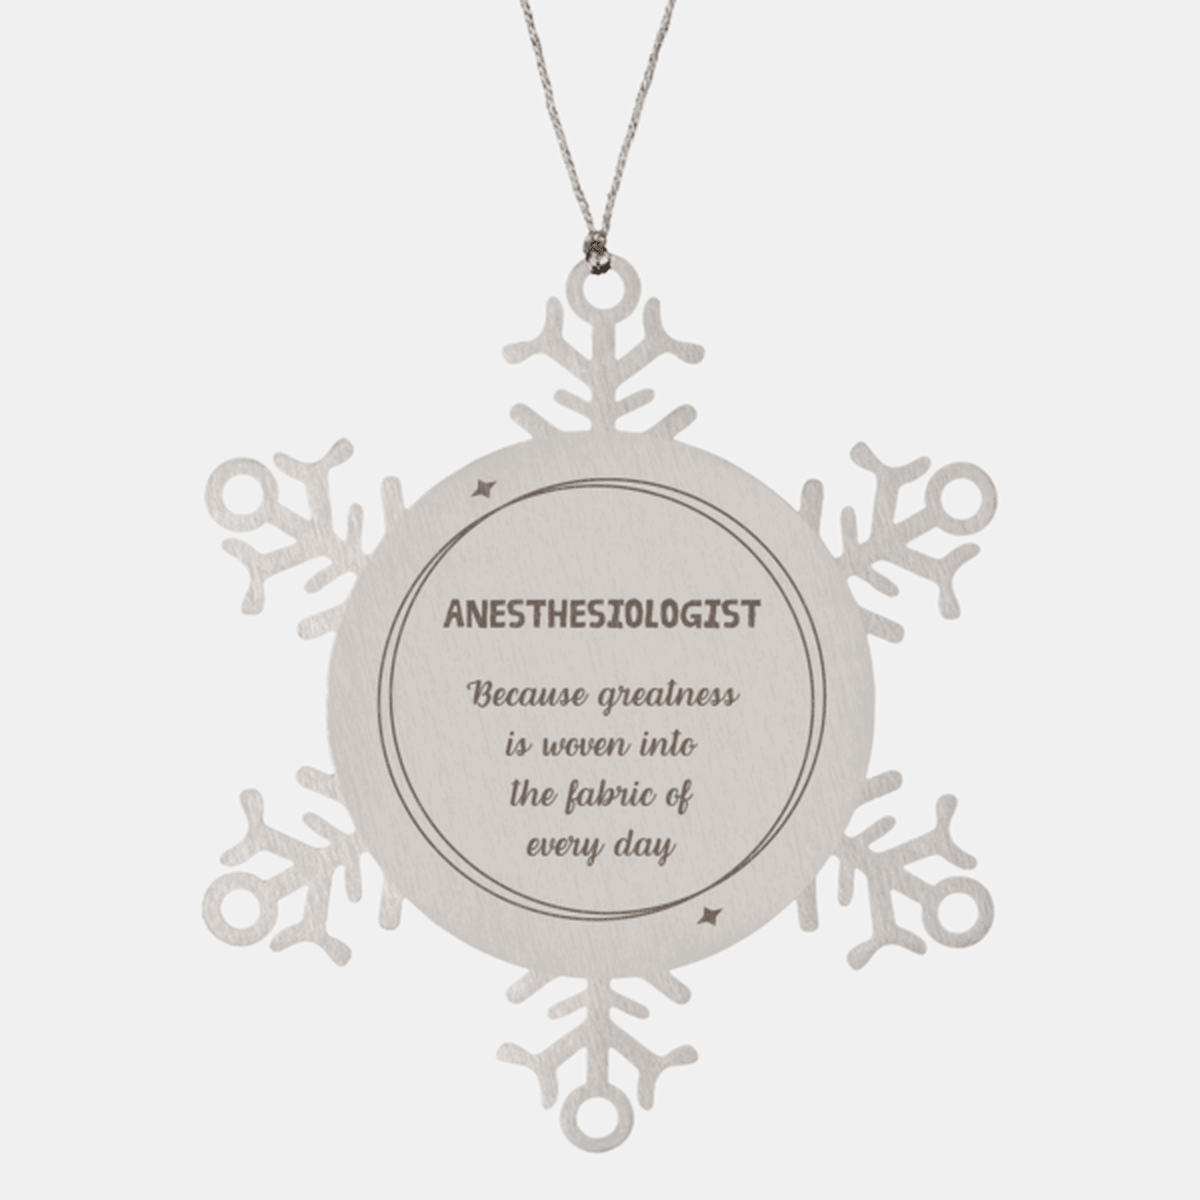 Sarcastic Anesthesiologist Snowflake Ornament Gifts, Christmas Holiday Gifts for Anesthesiologist Ornament, Anesthesiologist: Because greatness is woven into the fabric of every day, Coworkers, Friends - Mallard Moon Gift Shop